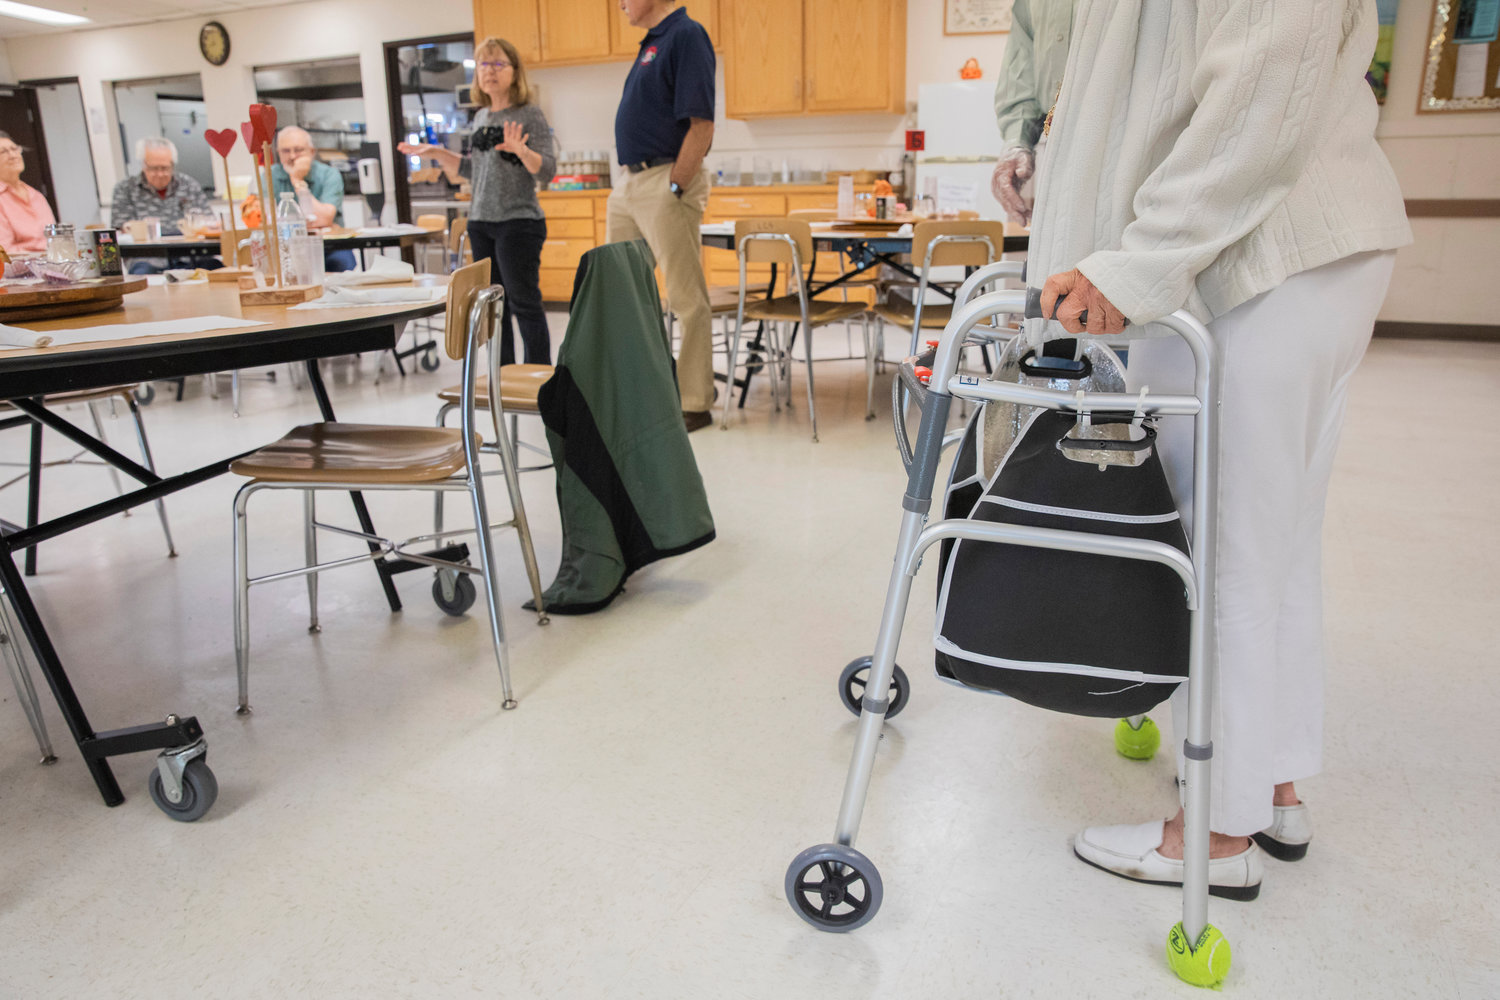 Patty Dolezal talks about about preventative measures such as using walkers and canes to prevent falls Tuesday morning at the Twin Cities Senior Center in Chehalis.